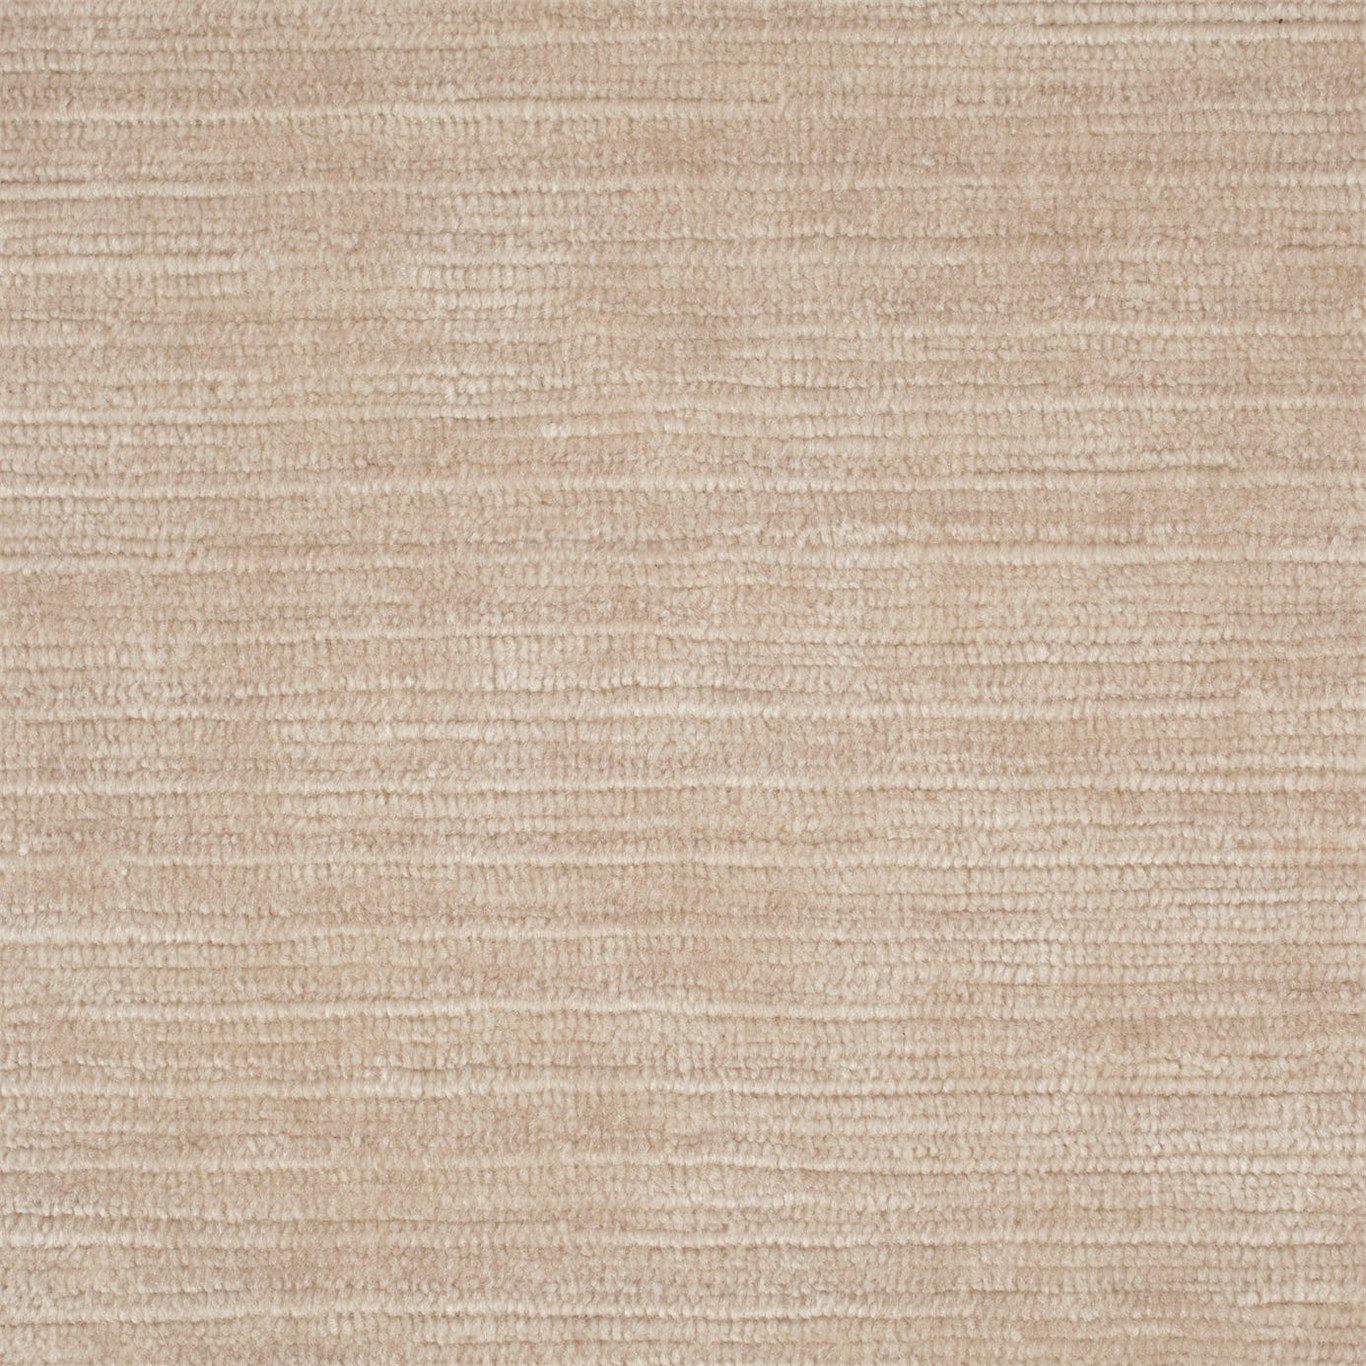 Tresillo Oyster Fabric by HAR